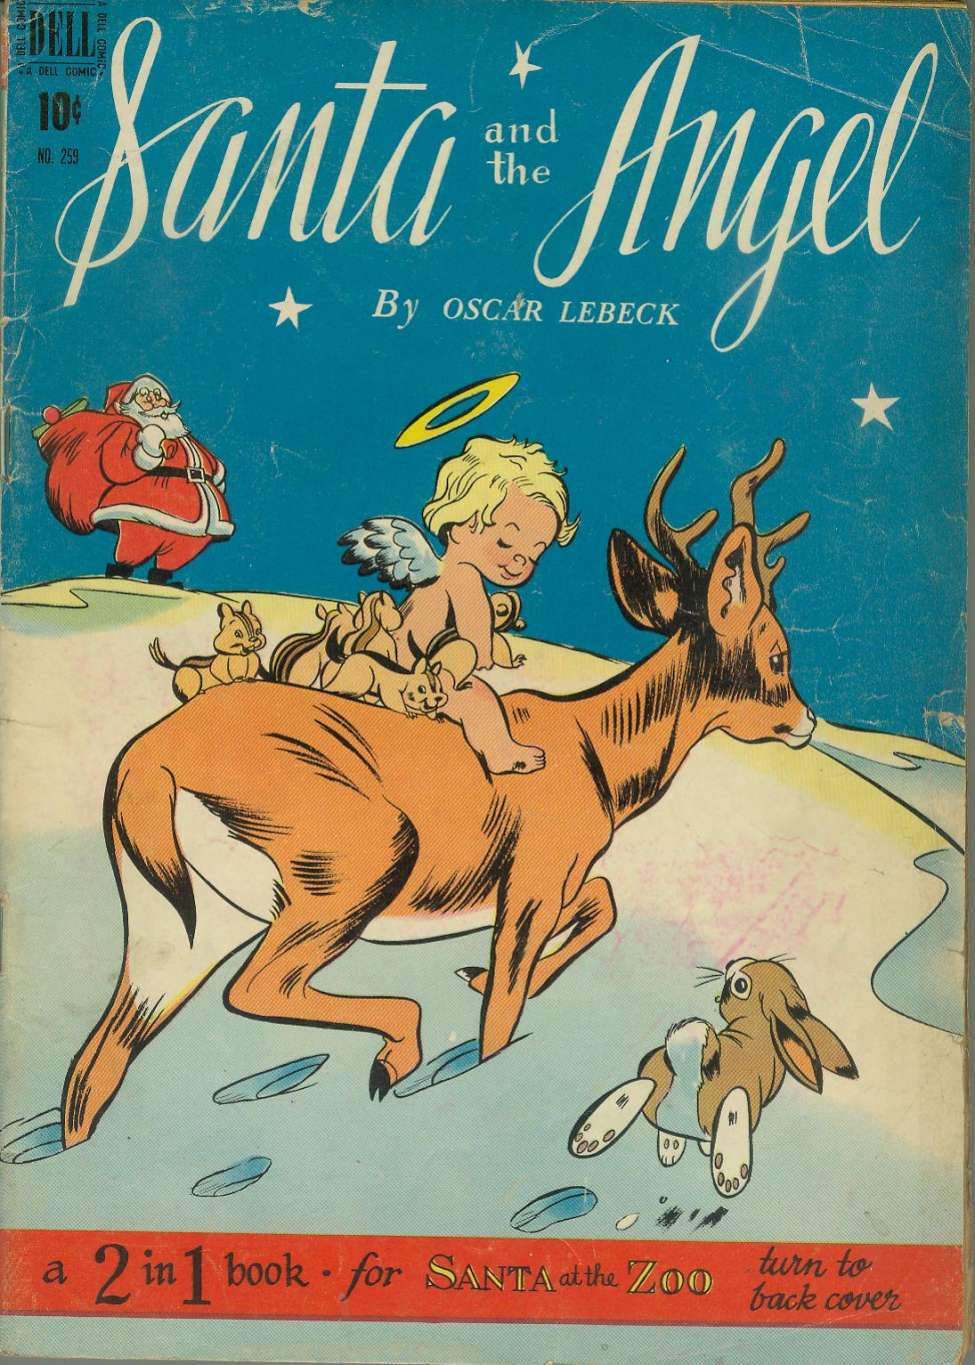 Book Cover For 0259 - Santa and the Angel